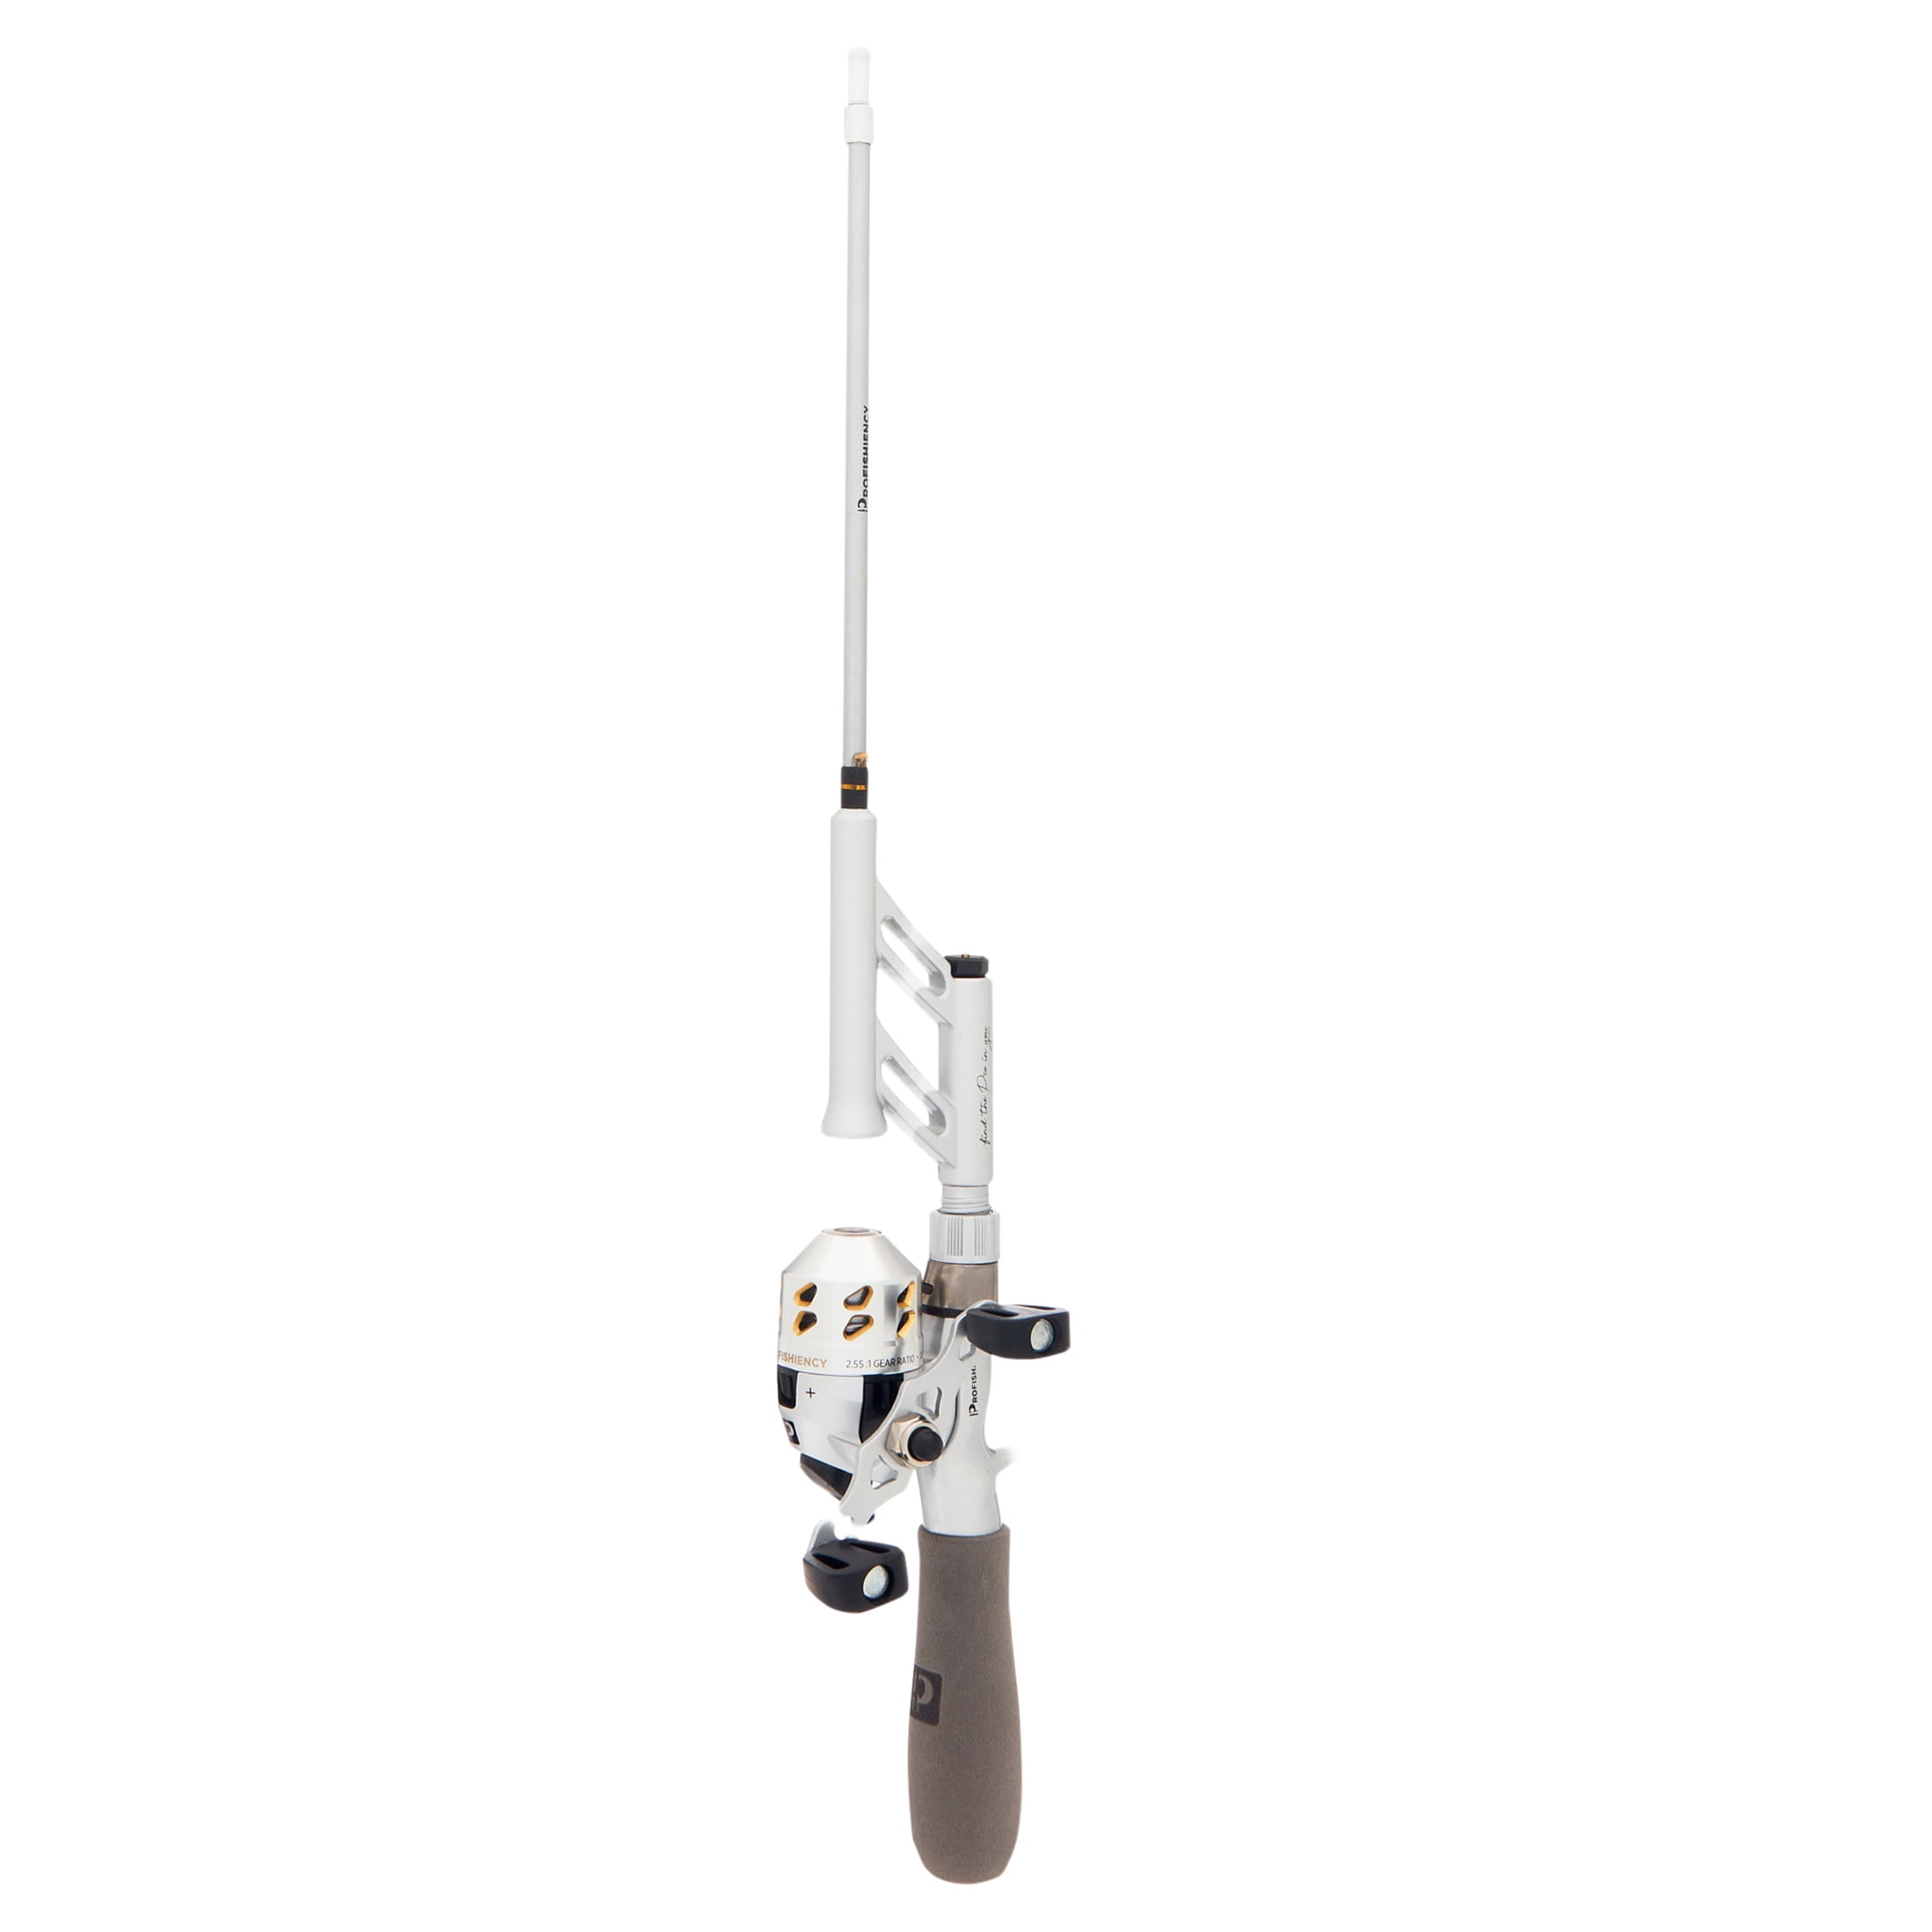 Profishiency Tiny But Mighty Pocket Spincast Rod and Reel Combo -  14.5-20in, Light Power, 1pc